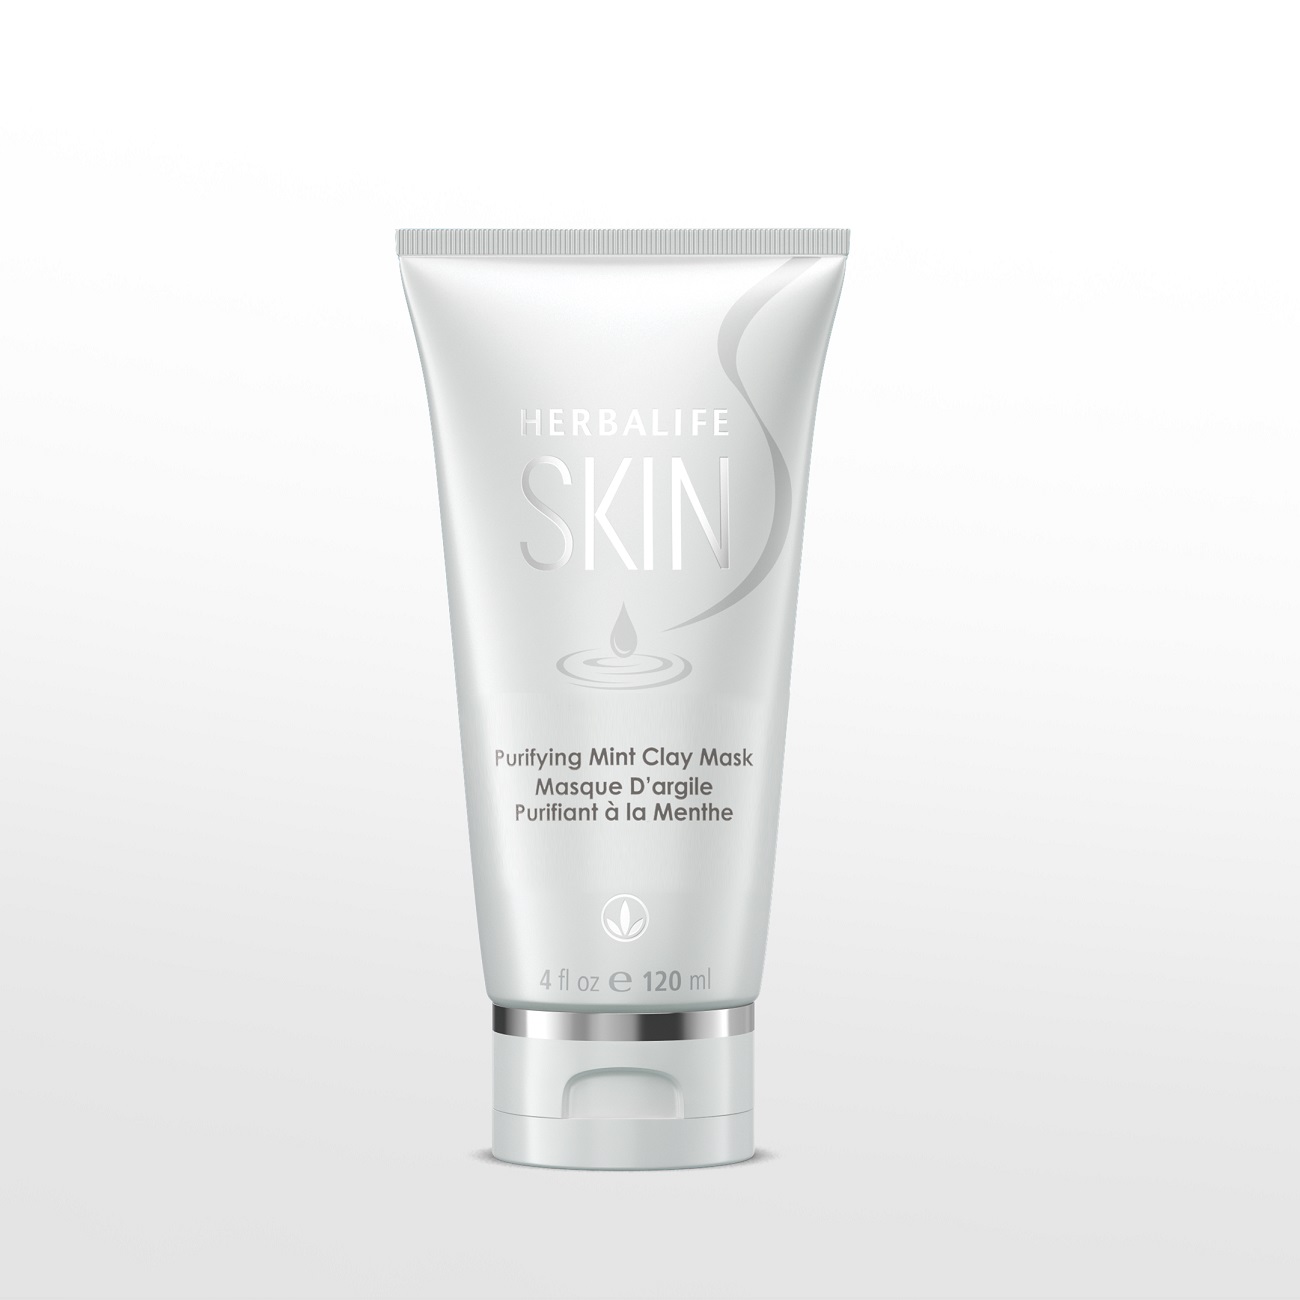 0773 Herbalife Skin Purifying Mint Clay Mask 